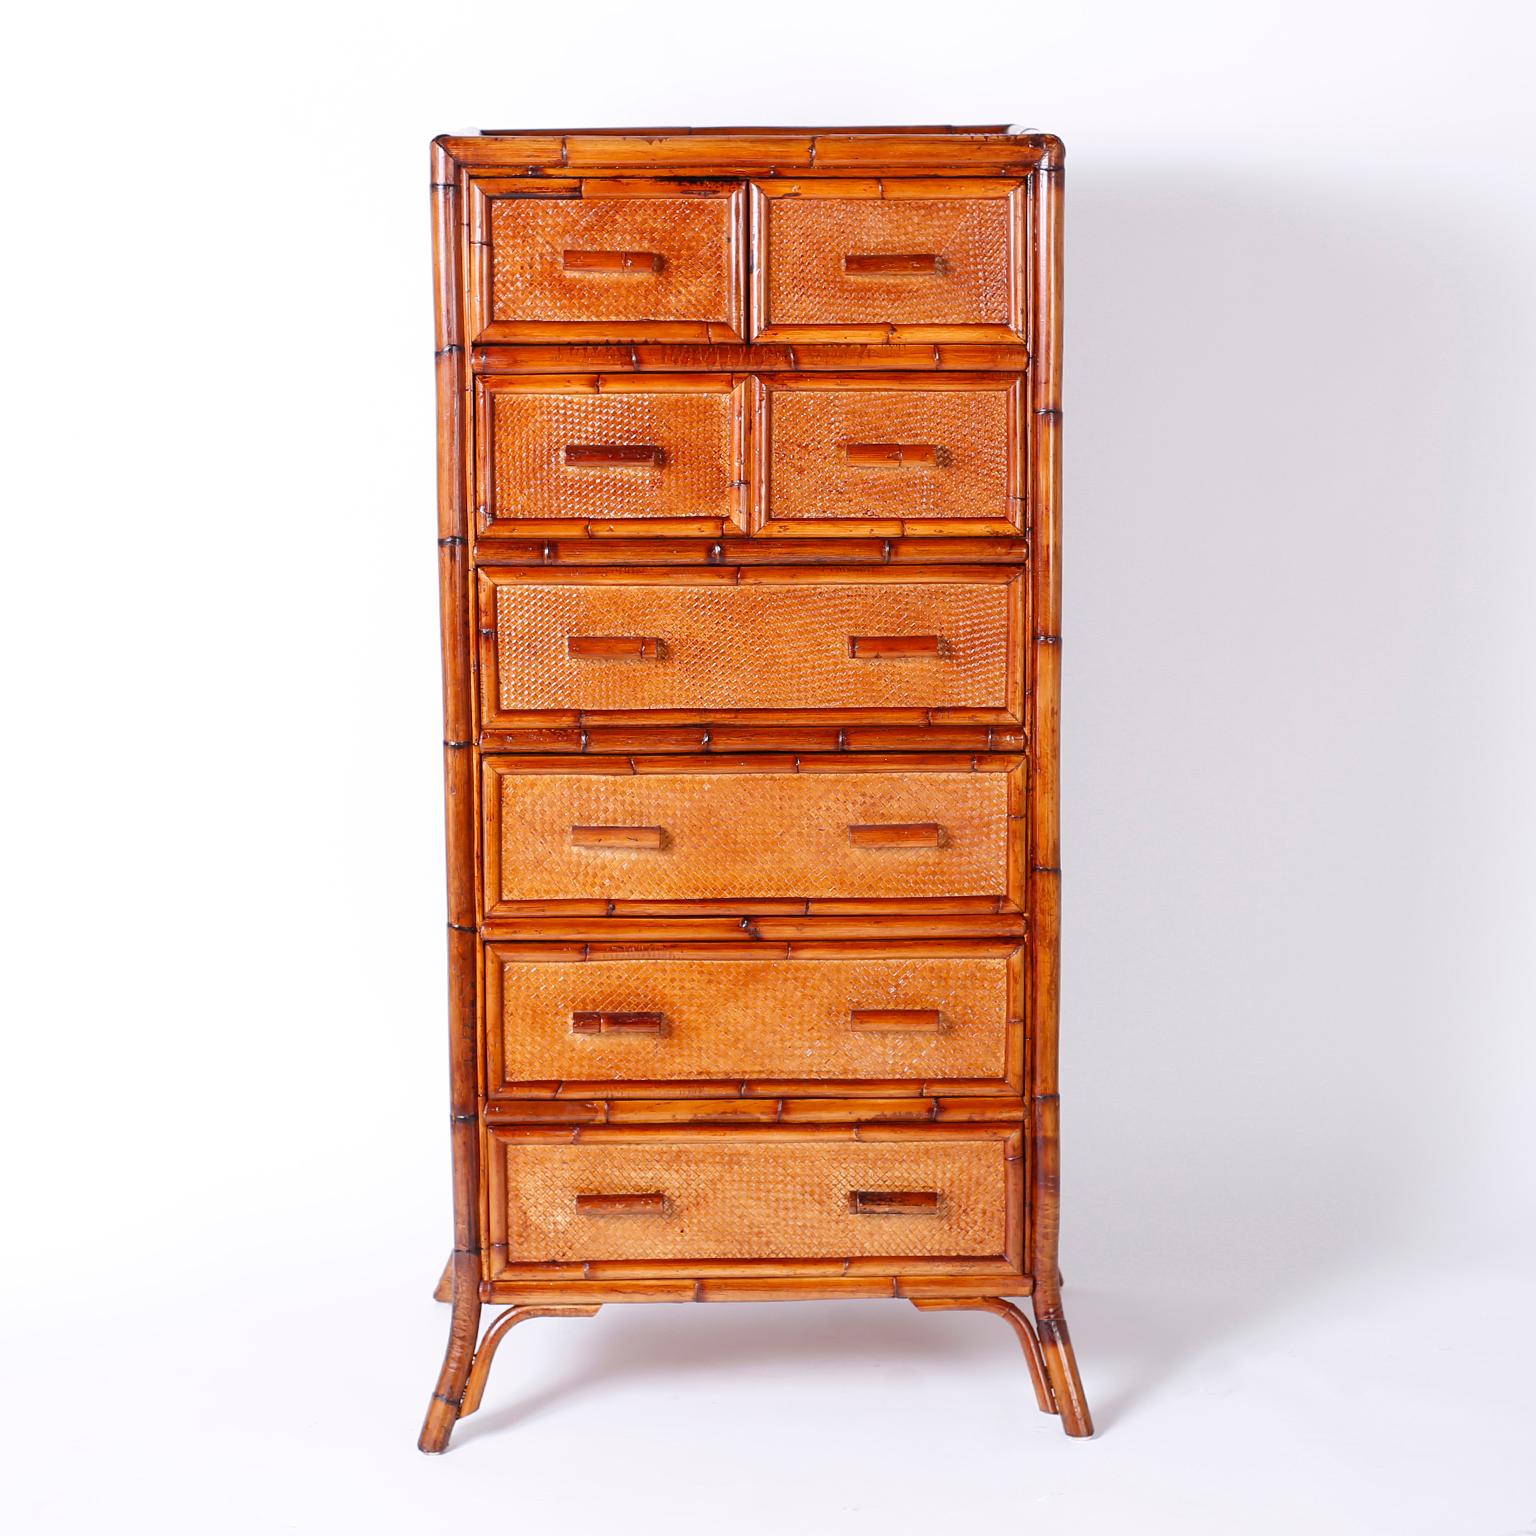 Gentlemen's chest of eight drawers with a casual elegance and featuring a bamboo frame, grasscloth panels, stylized sunrise designs on the sides and splayed legs.